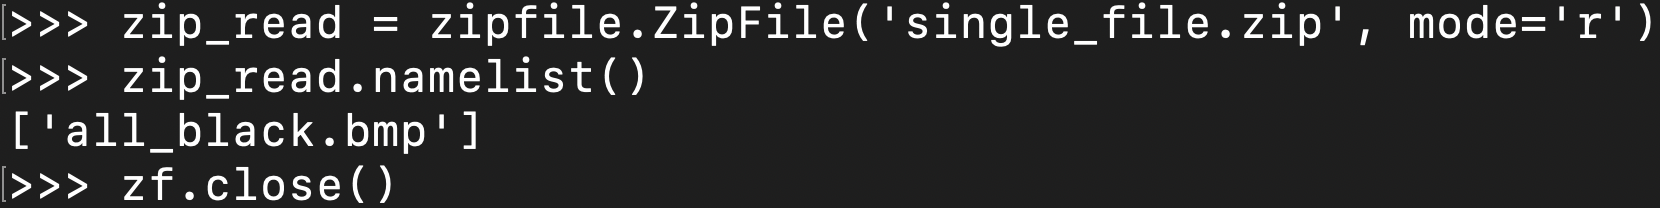 namelist() returns an array of each file in the zip file